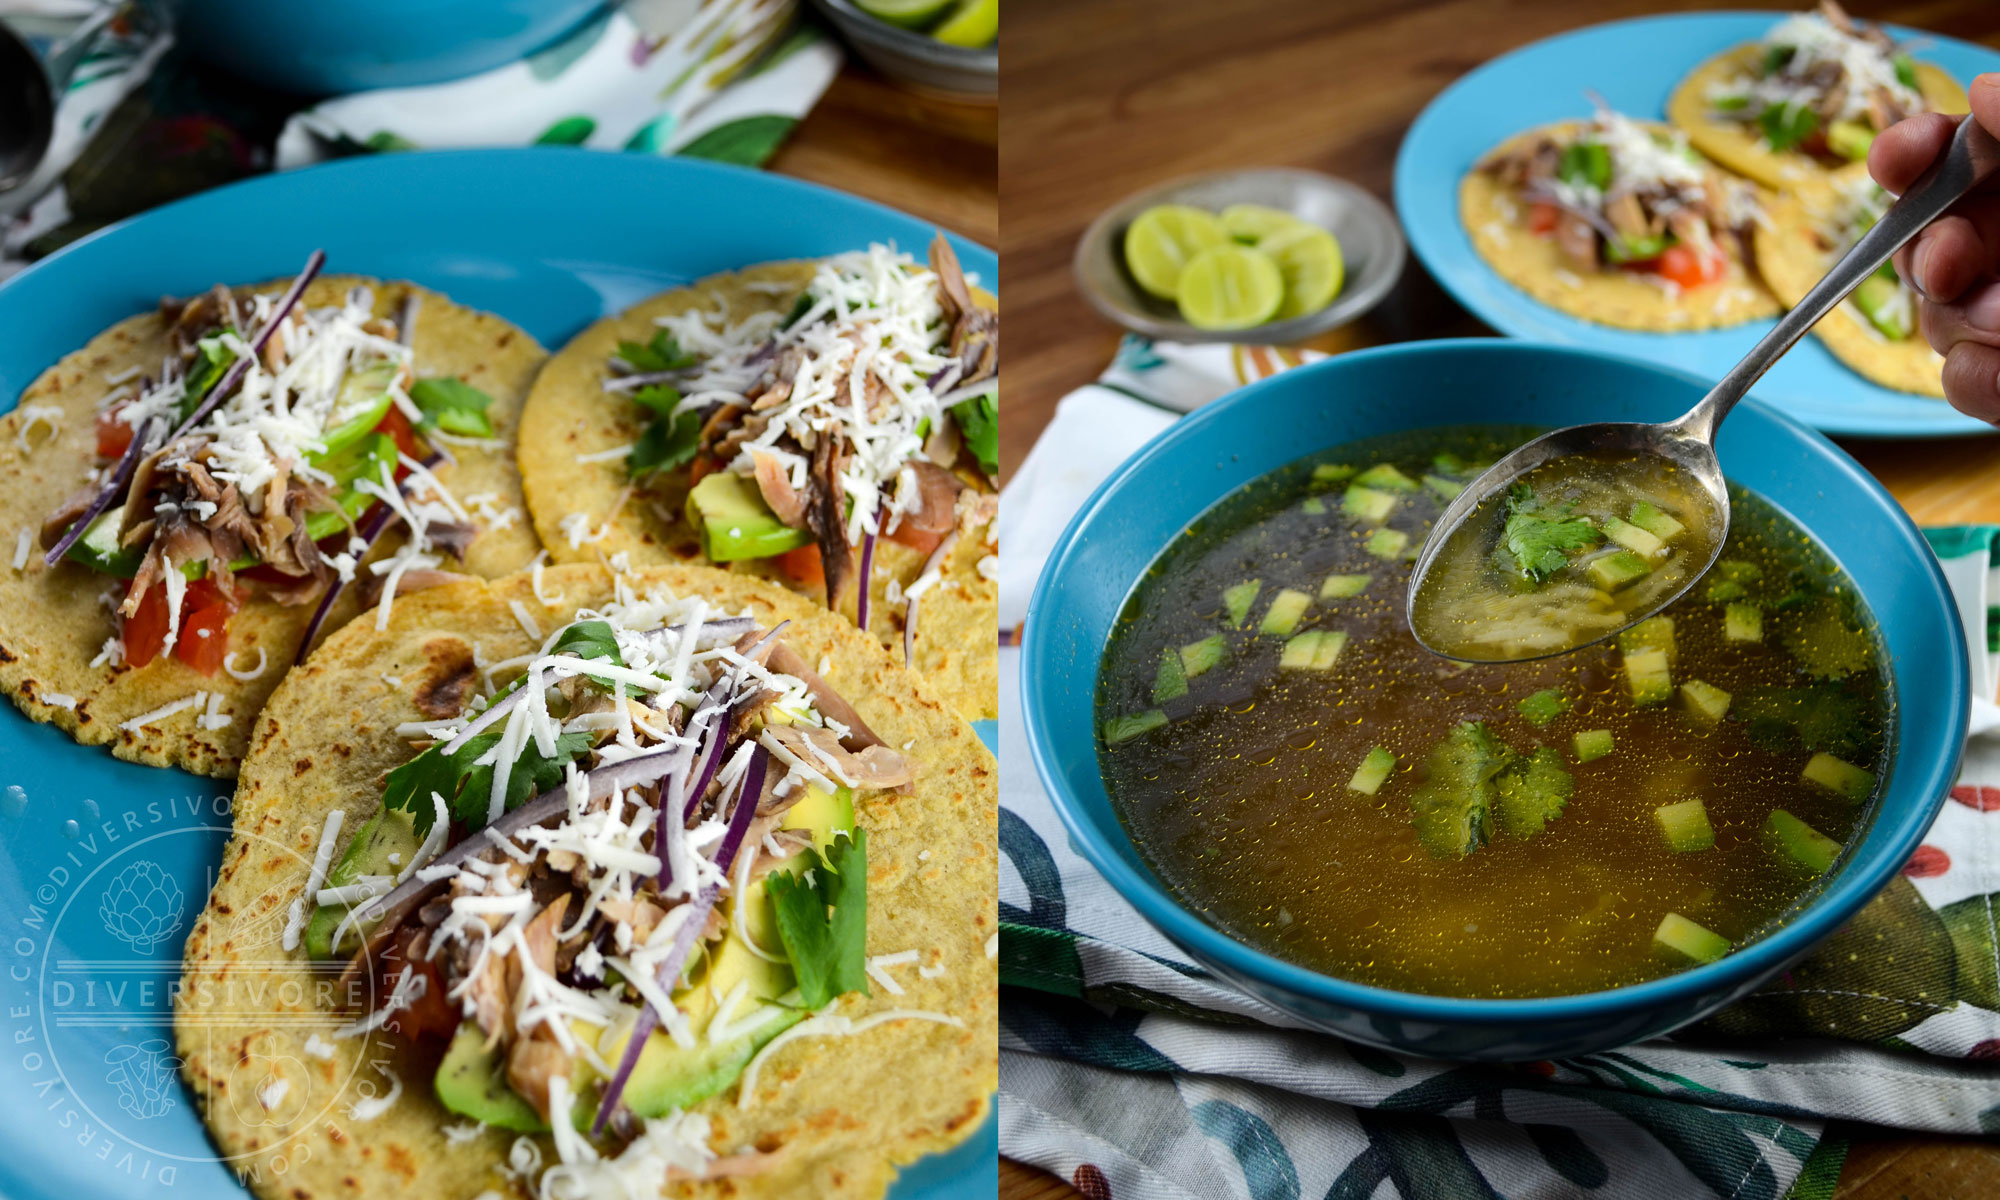 Spent-hen Chicken Tacos and Soup, made together in an InstantPot electric pressure cooker - Diversivore.com